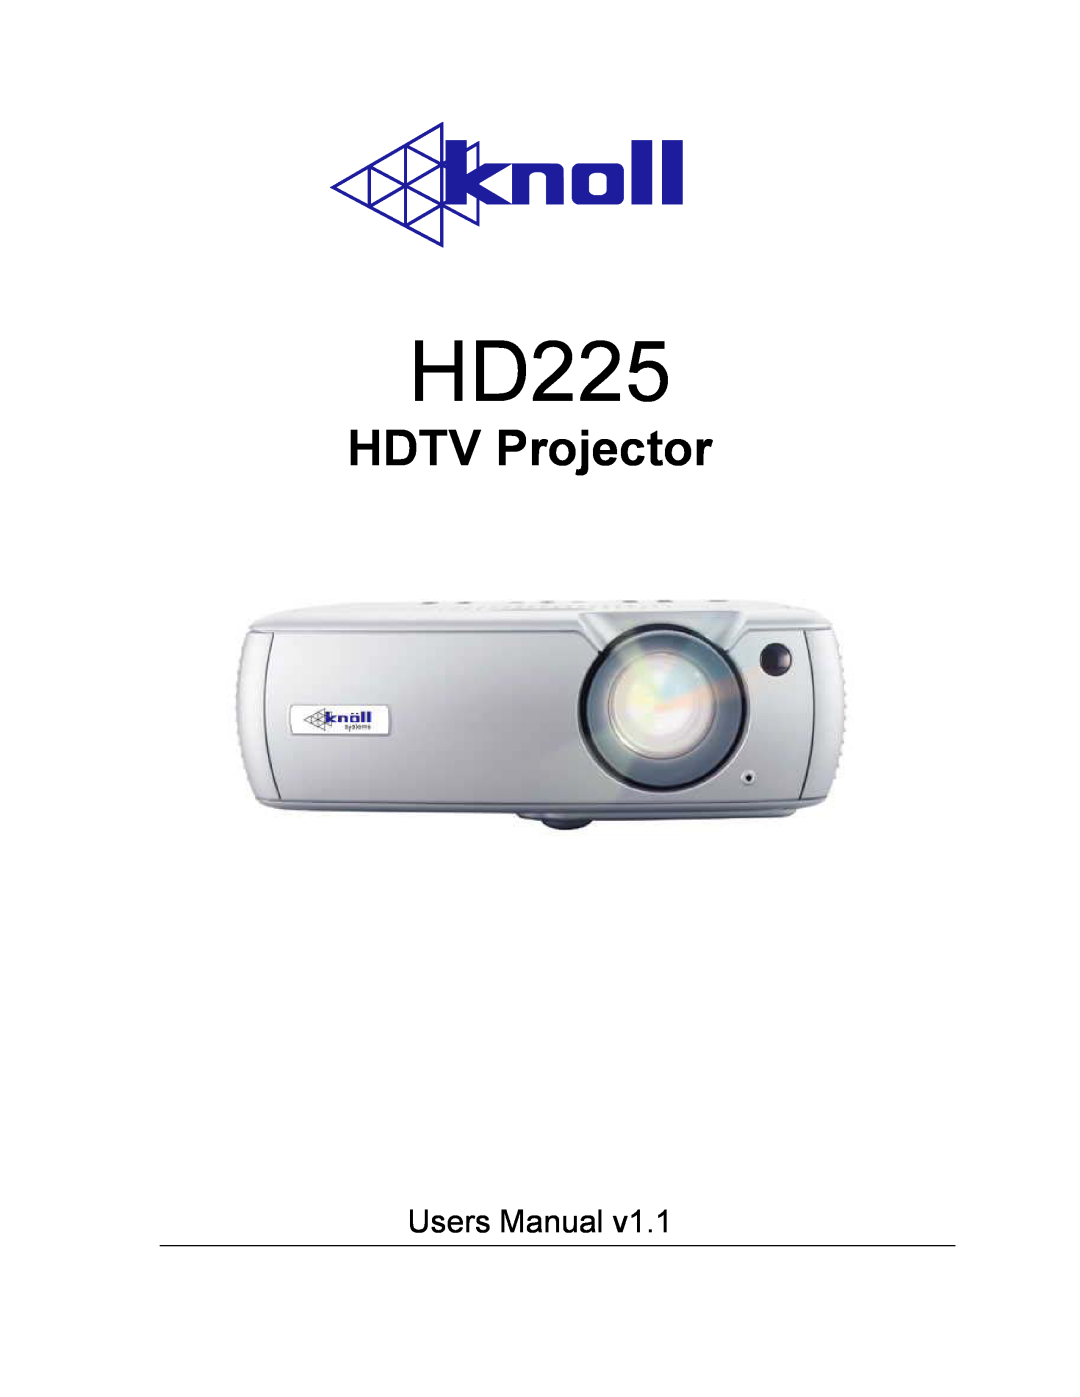 Knoll Systems HD225 user manual HDTV Projector, Users Manual 